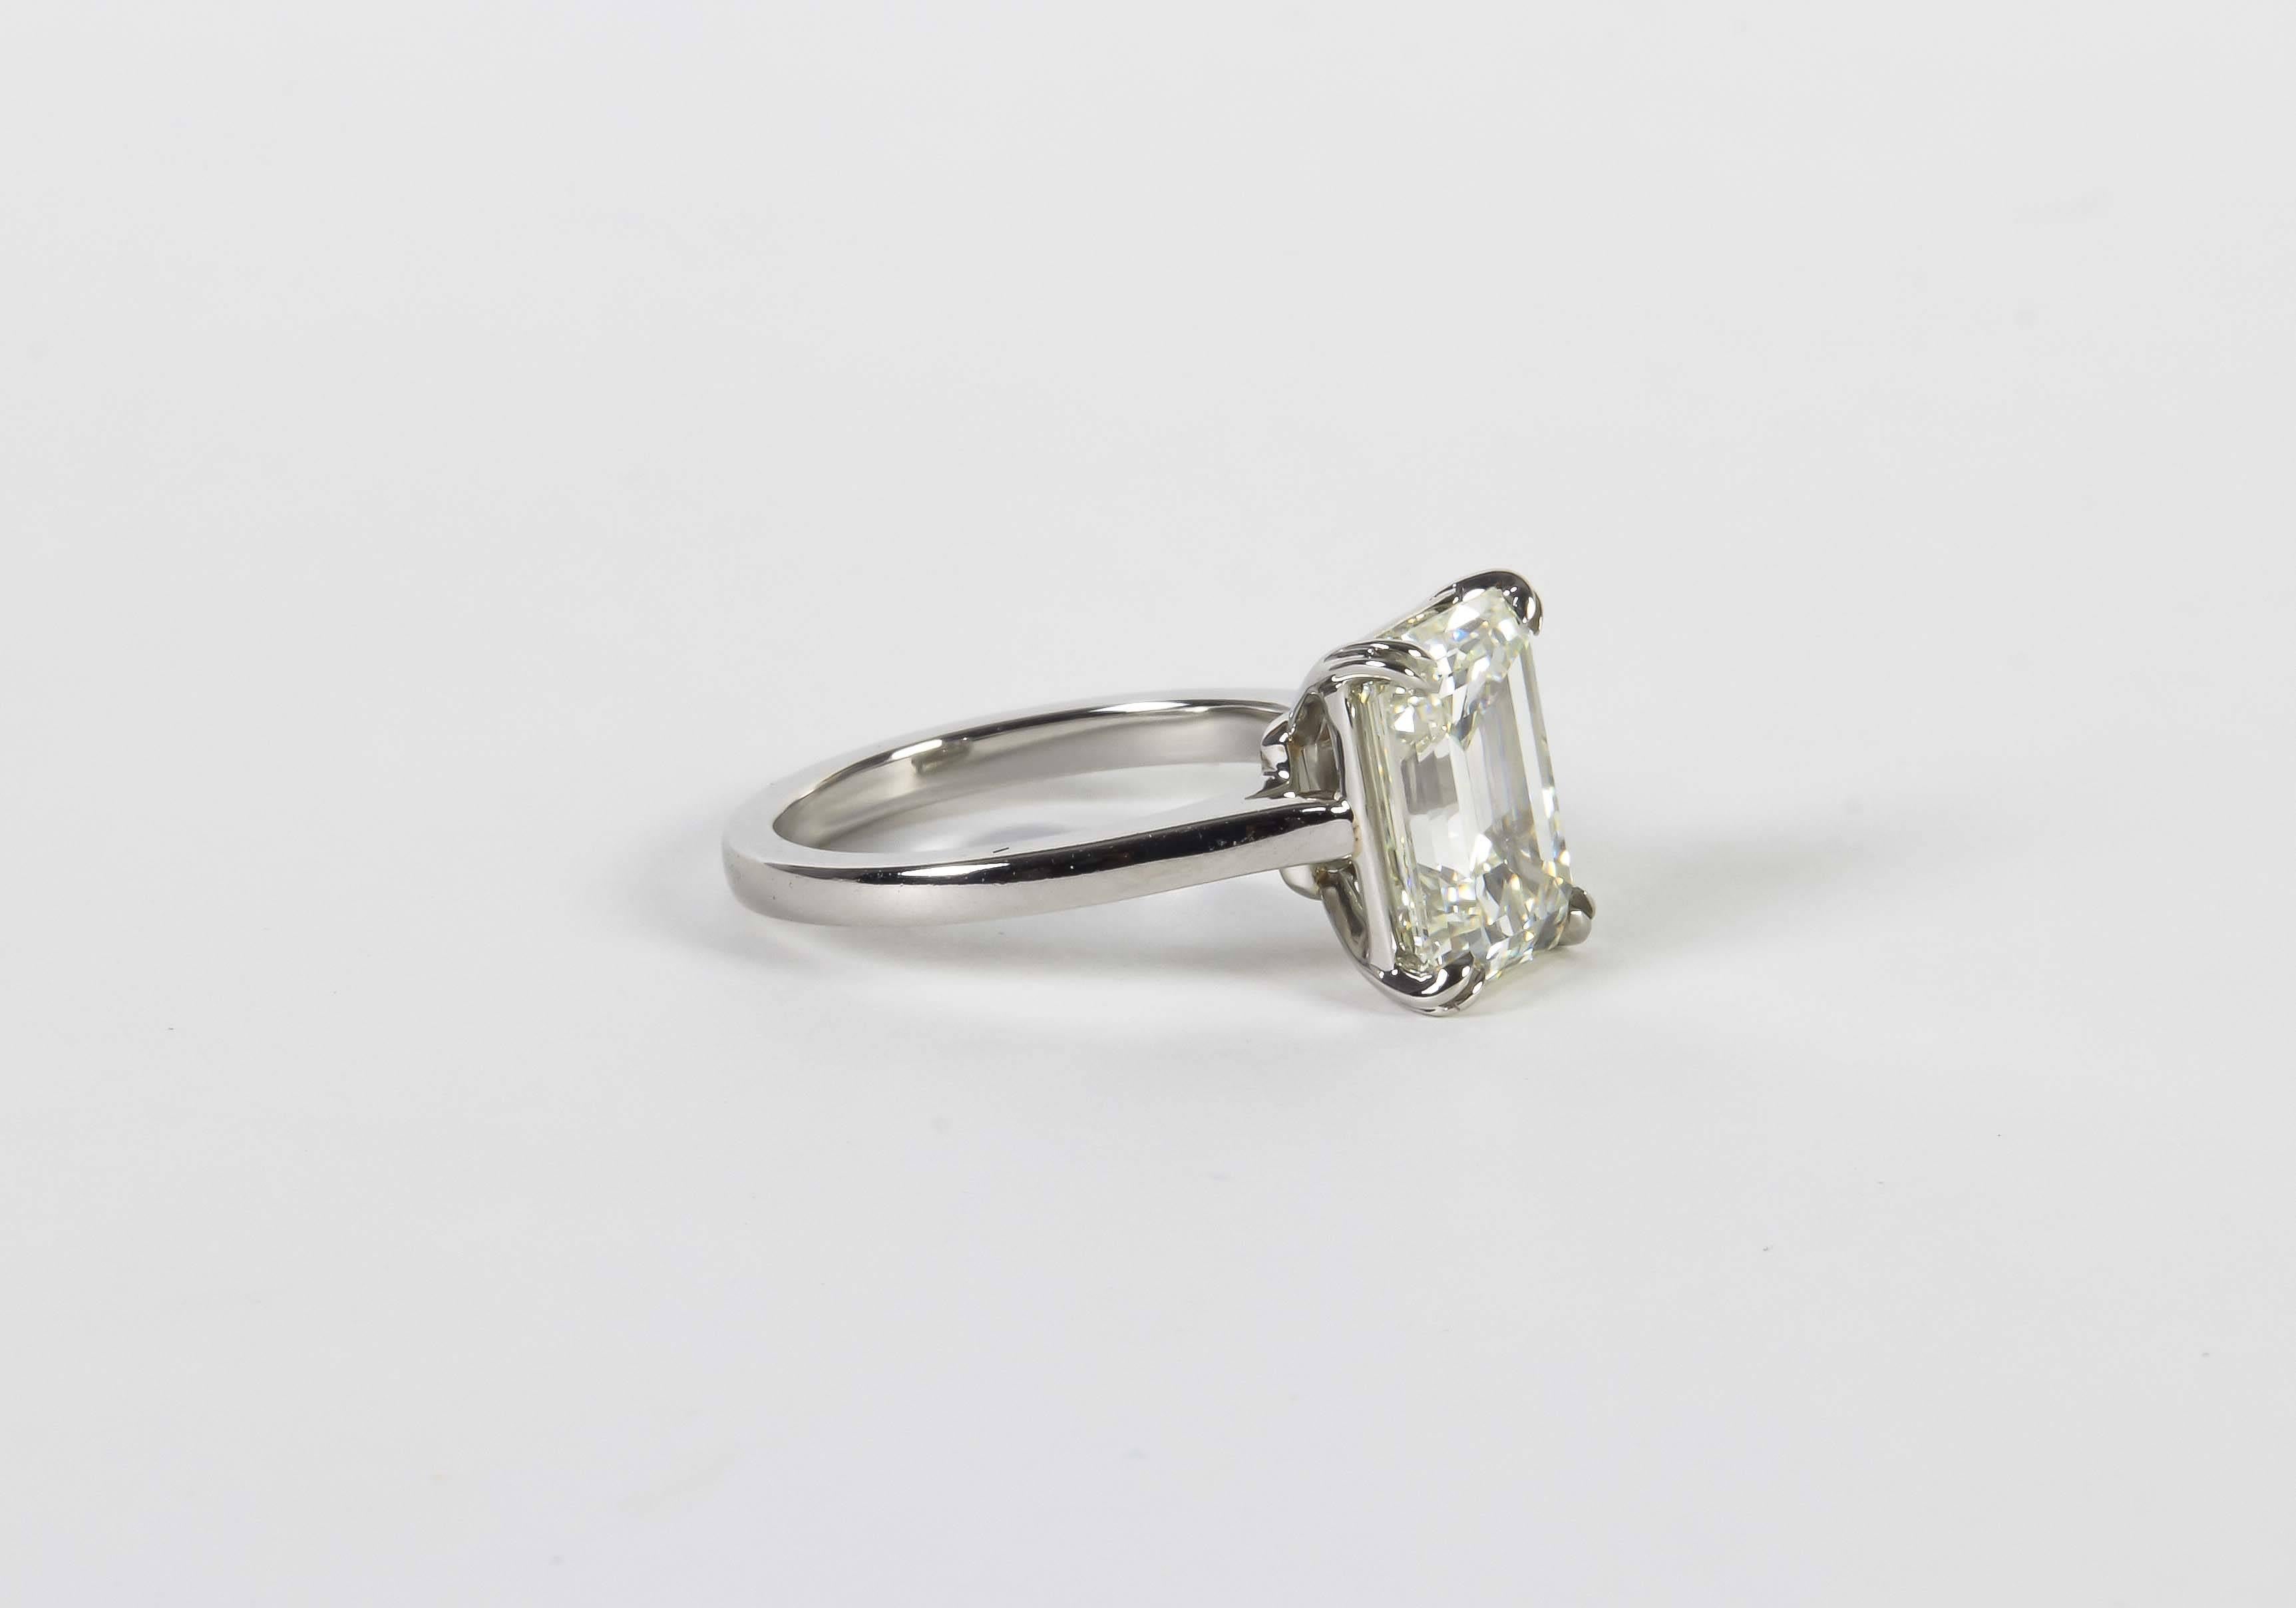 

A beautiful brilliant diamond in a custom made mounting.

GIA certified 4.26 carat K color VVS2 clarity set in a platinum mounting.

The stone has the perfect Emerald cut shape! The diamond faces up white, looks like an H/I color!

A stunning ring!